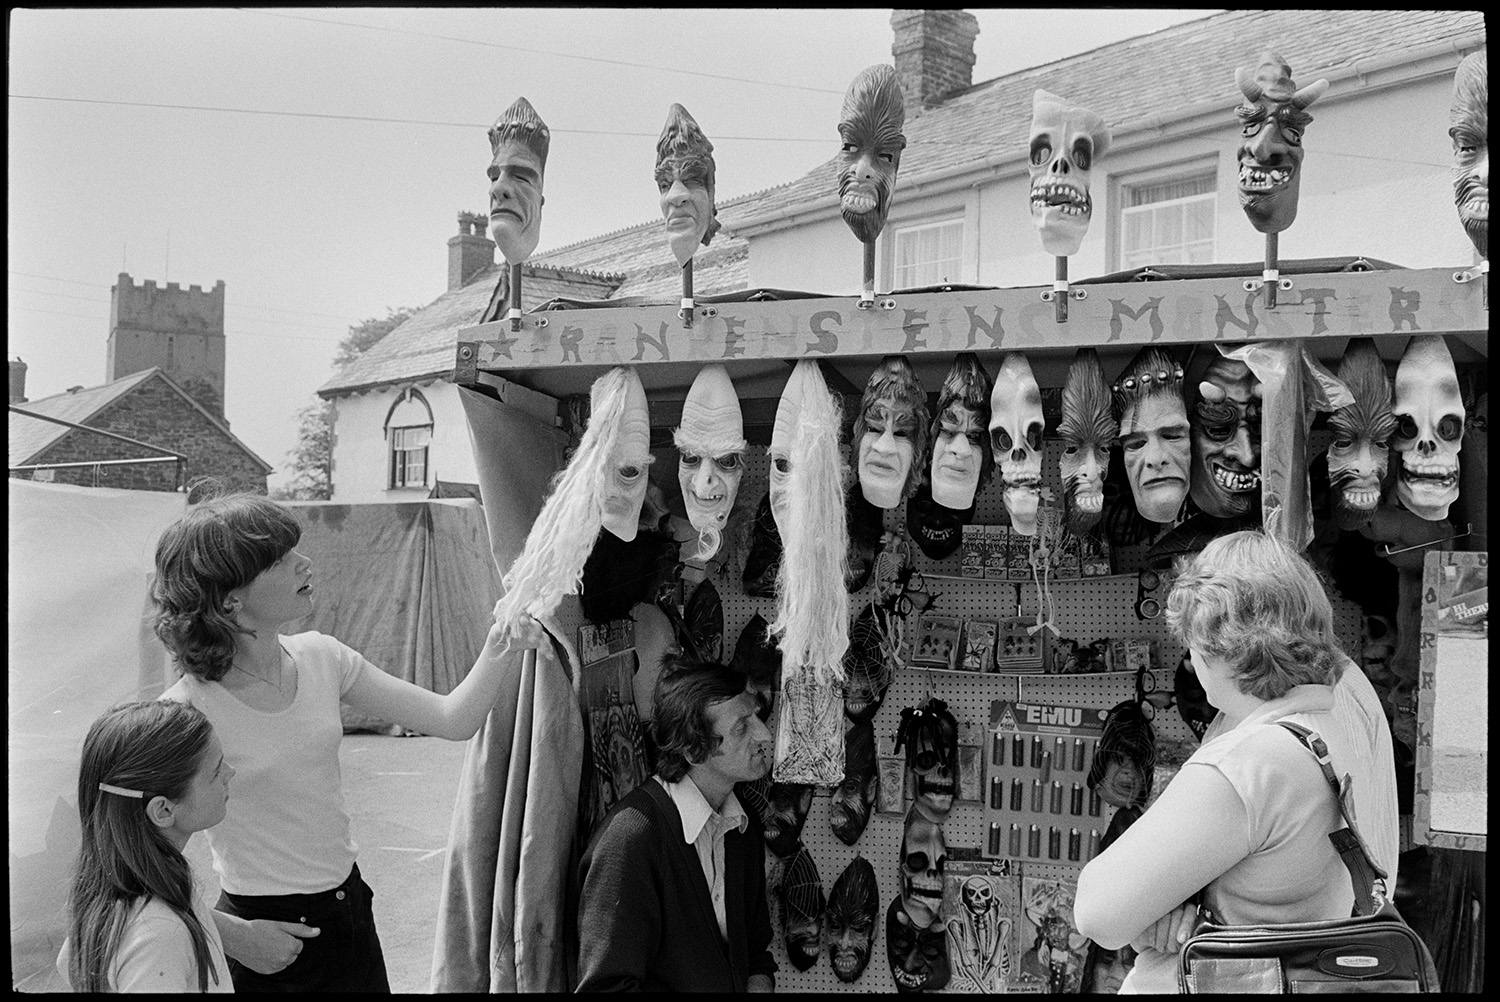 Open air market, village square part of festival, stalls, flags, crafts, books, plants. 
[Women and a child looking at masks on a stall called 'Frankenstein's Monster' at Dolton Festival or open air market. Dolton Church tower can be seen in the background.]